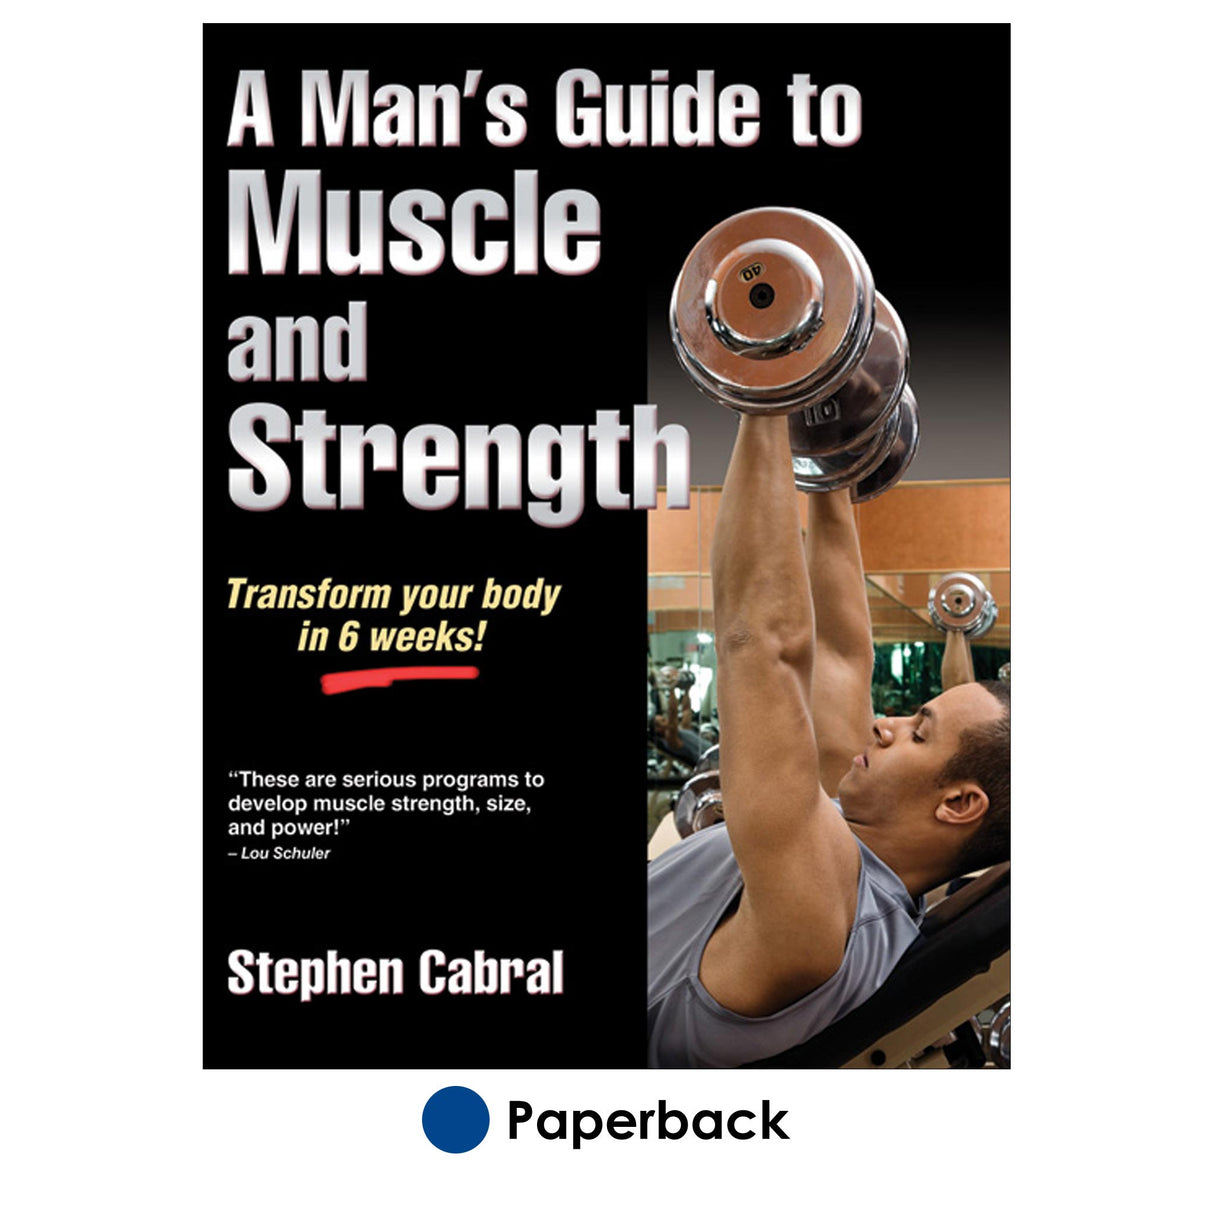 Man's Guide to Muscle and Strength, A